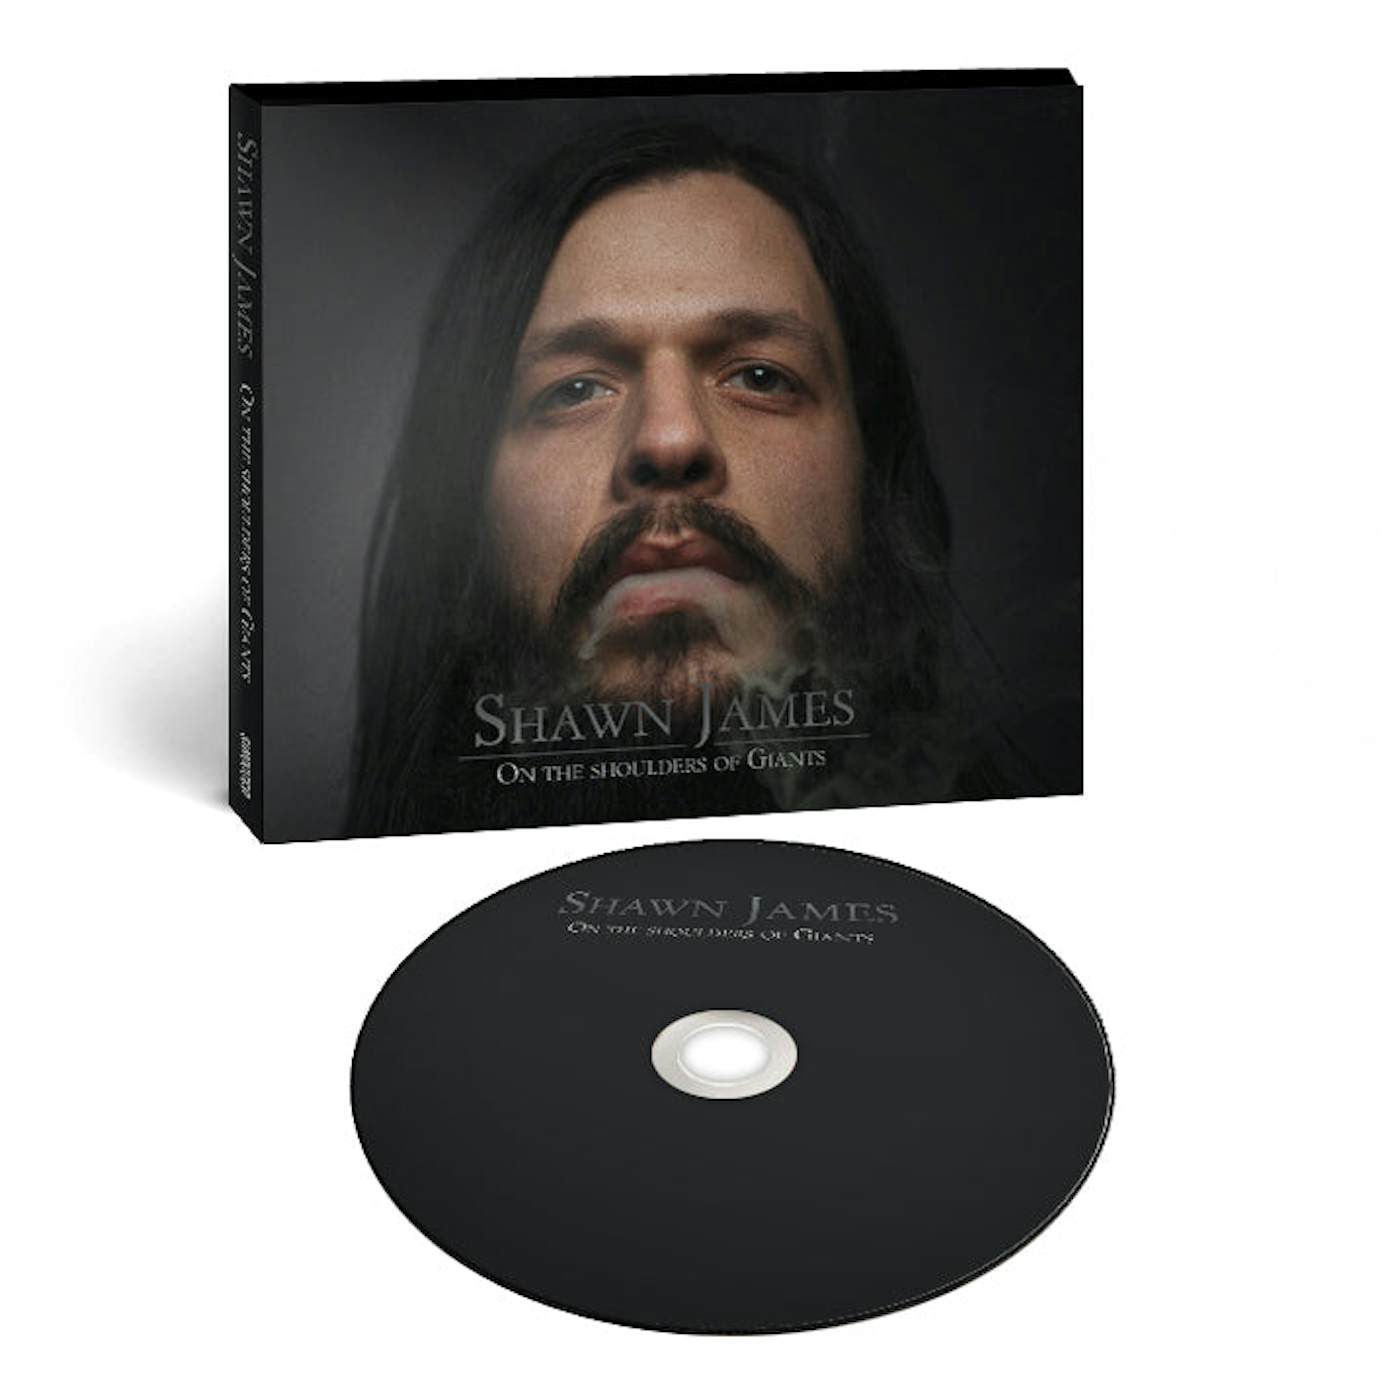 Shawn James "On The Shoulders of Giants" CD